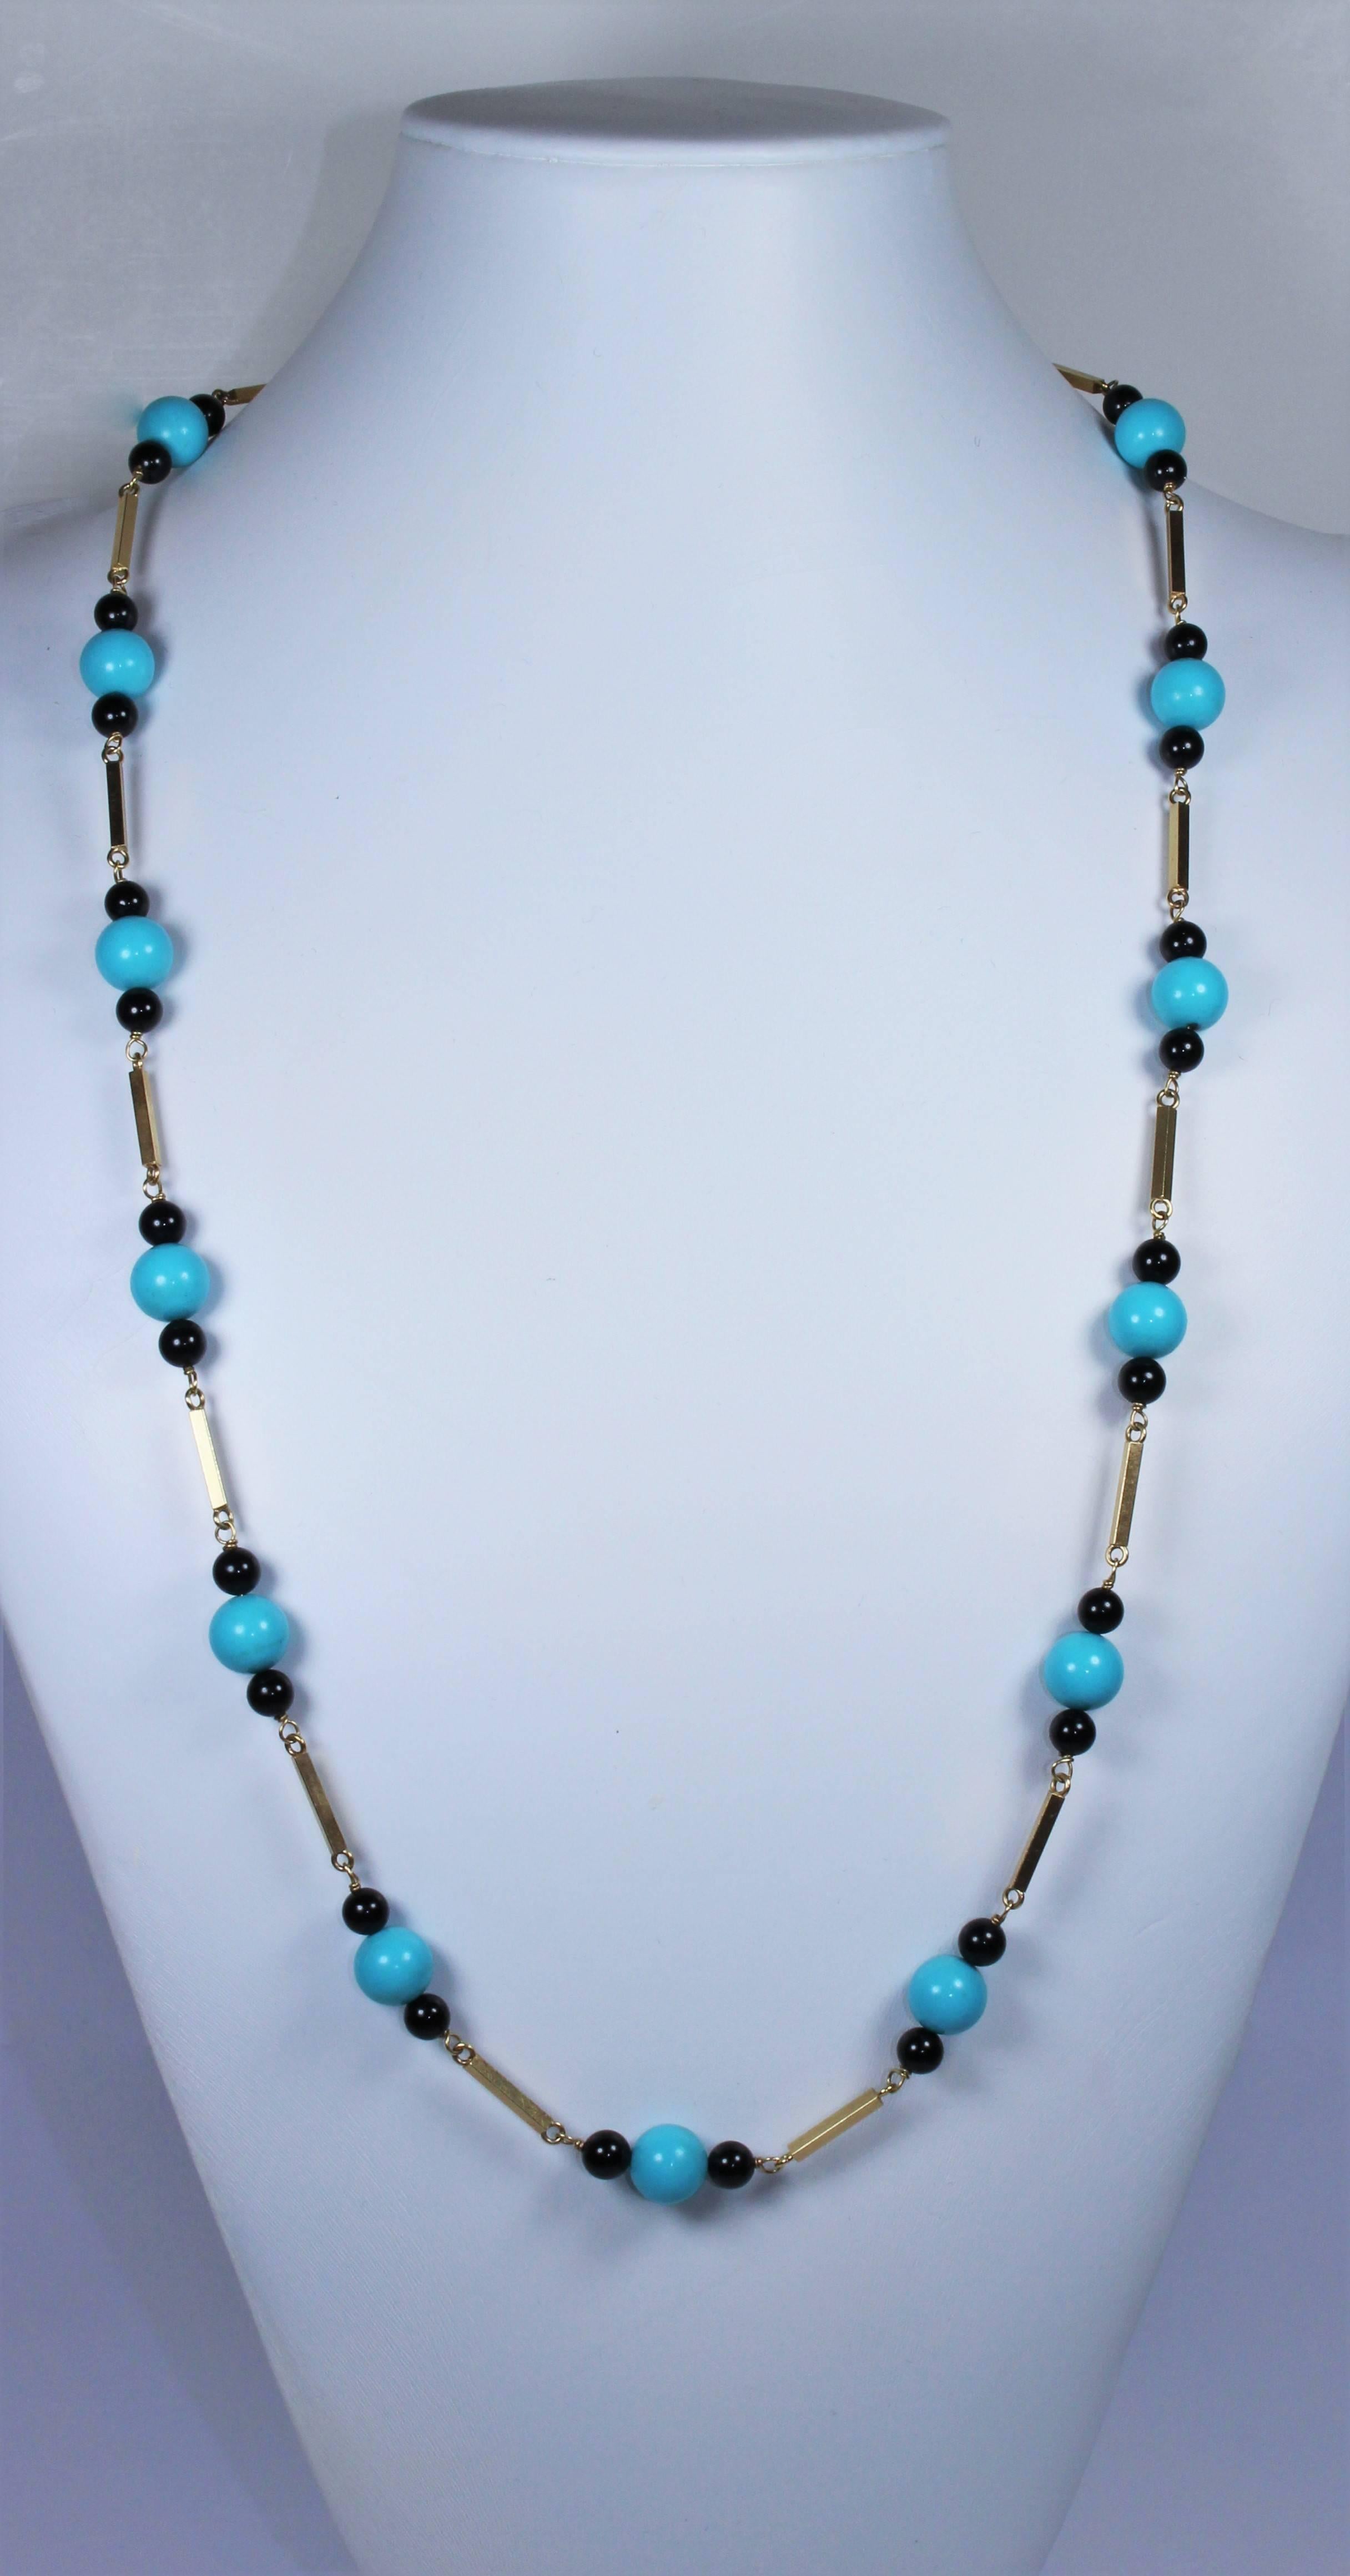 Onyx & Turquoise Bead 14 KT Yellow Gold Necklace or Double Strand Choker 1